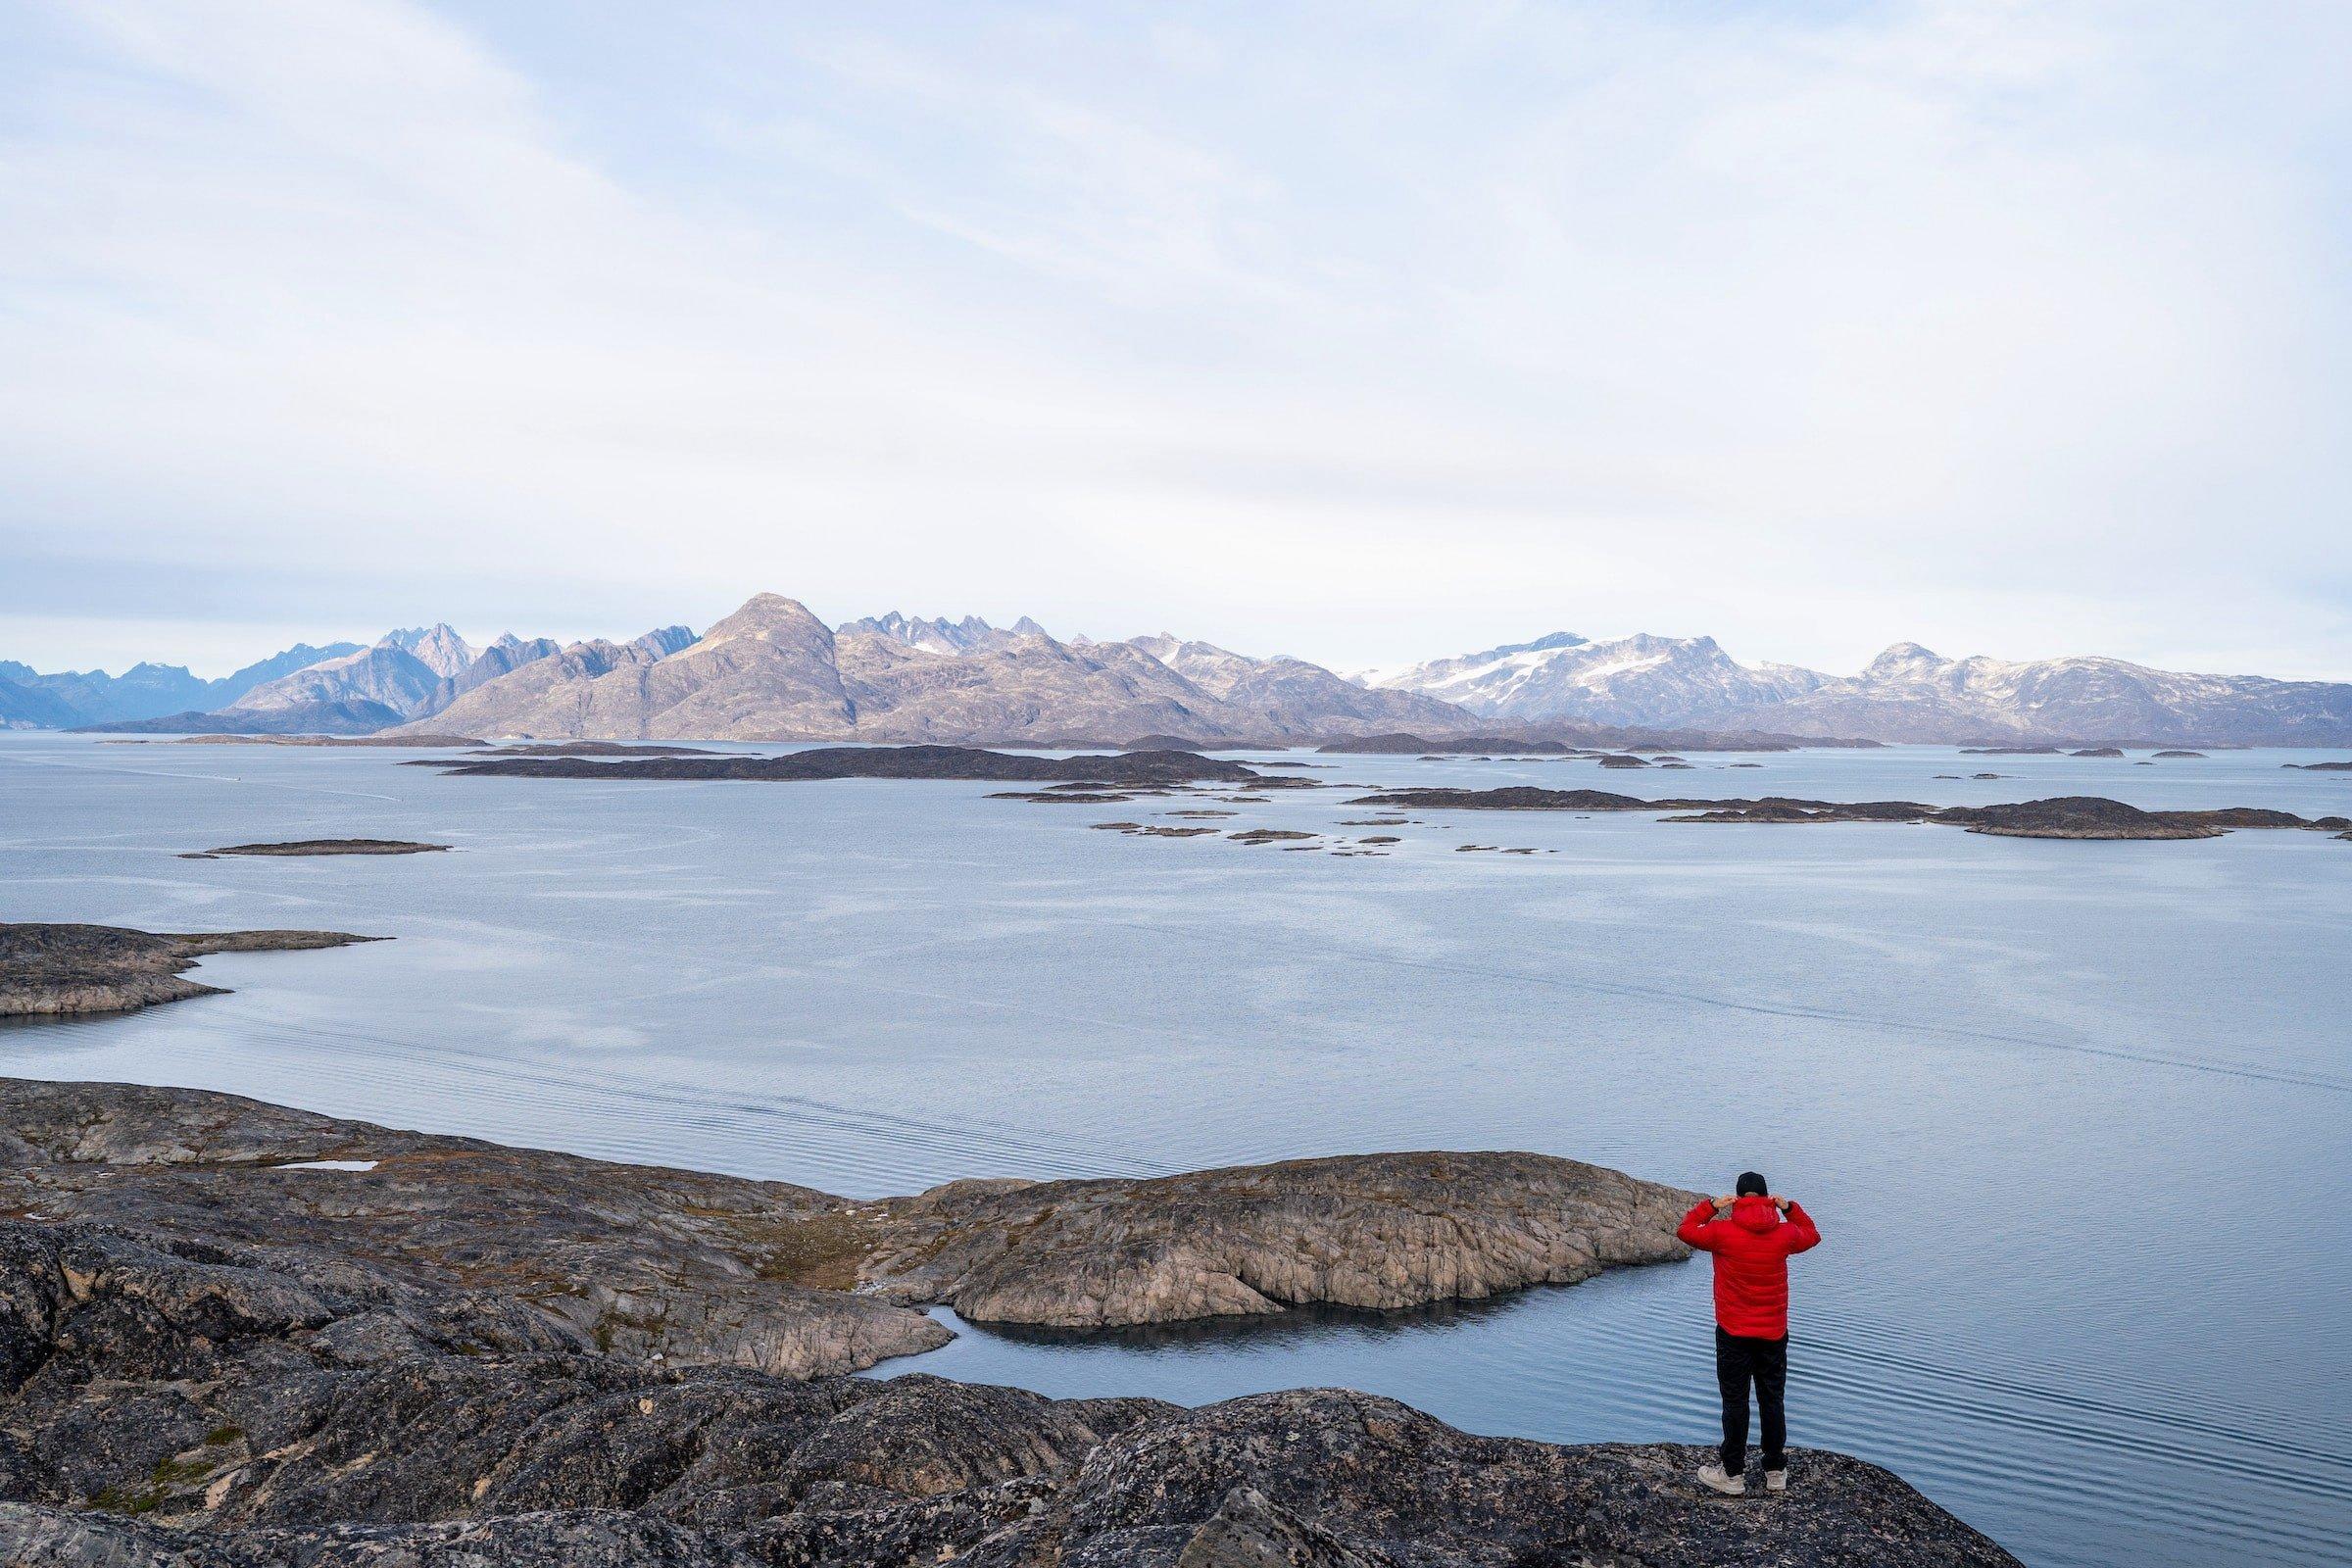 Looking over the fjord of Maniitsoq from an off-trail hiking path. Photo by Filip Gielda